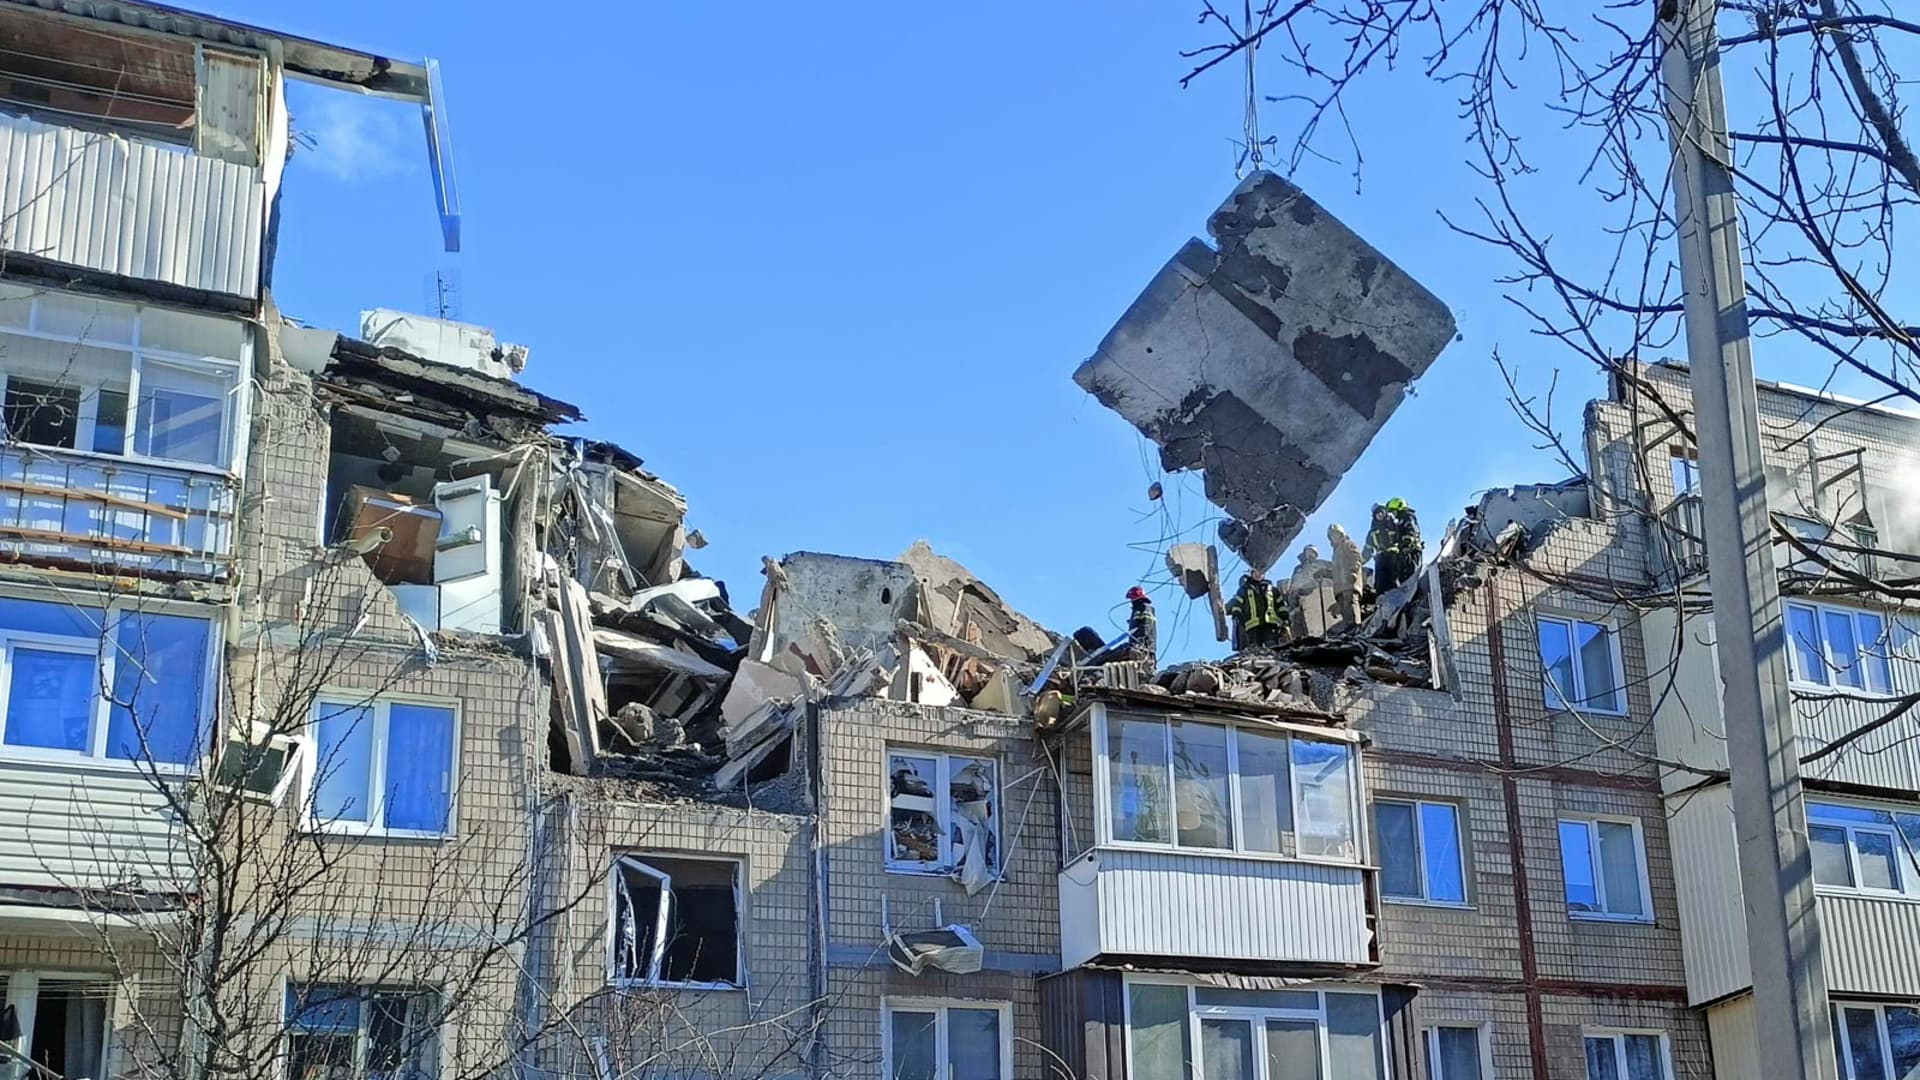 Rescuers remove debris from a residential building damaged by an airstrike, as Russia?s attack on Ukraine continues, in Kharkiv, Ukraine March 15, 2022.